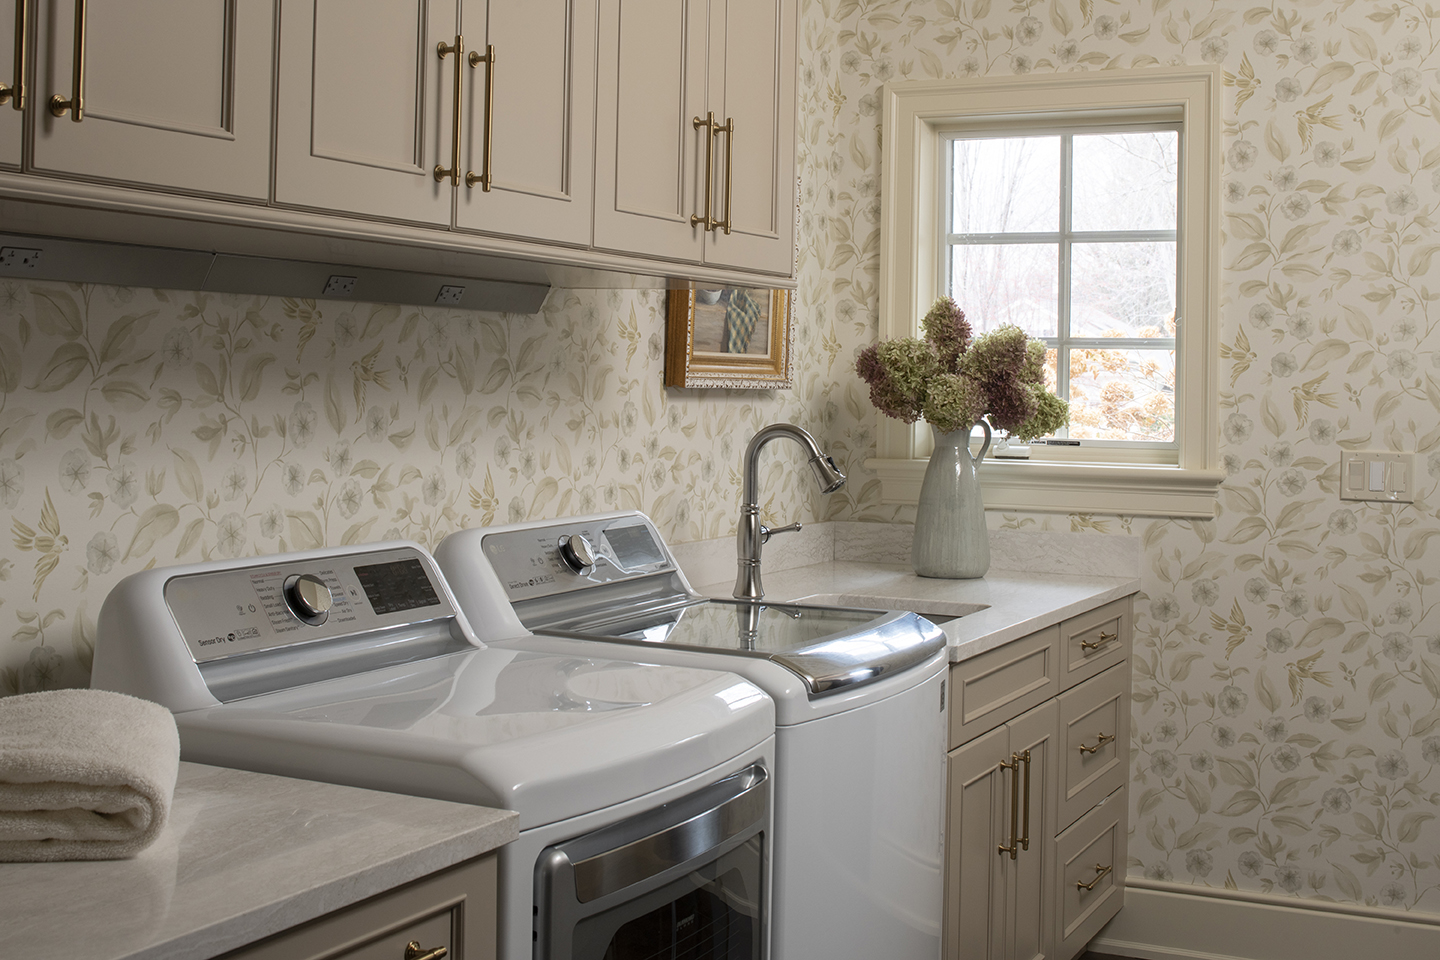 Laundry Room Remodel Reveal